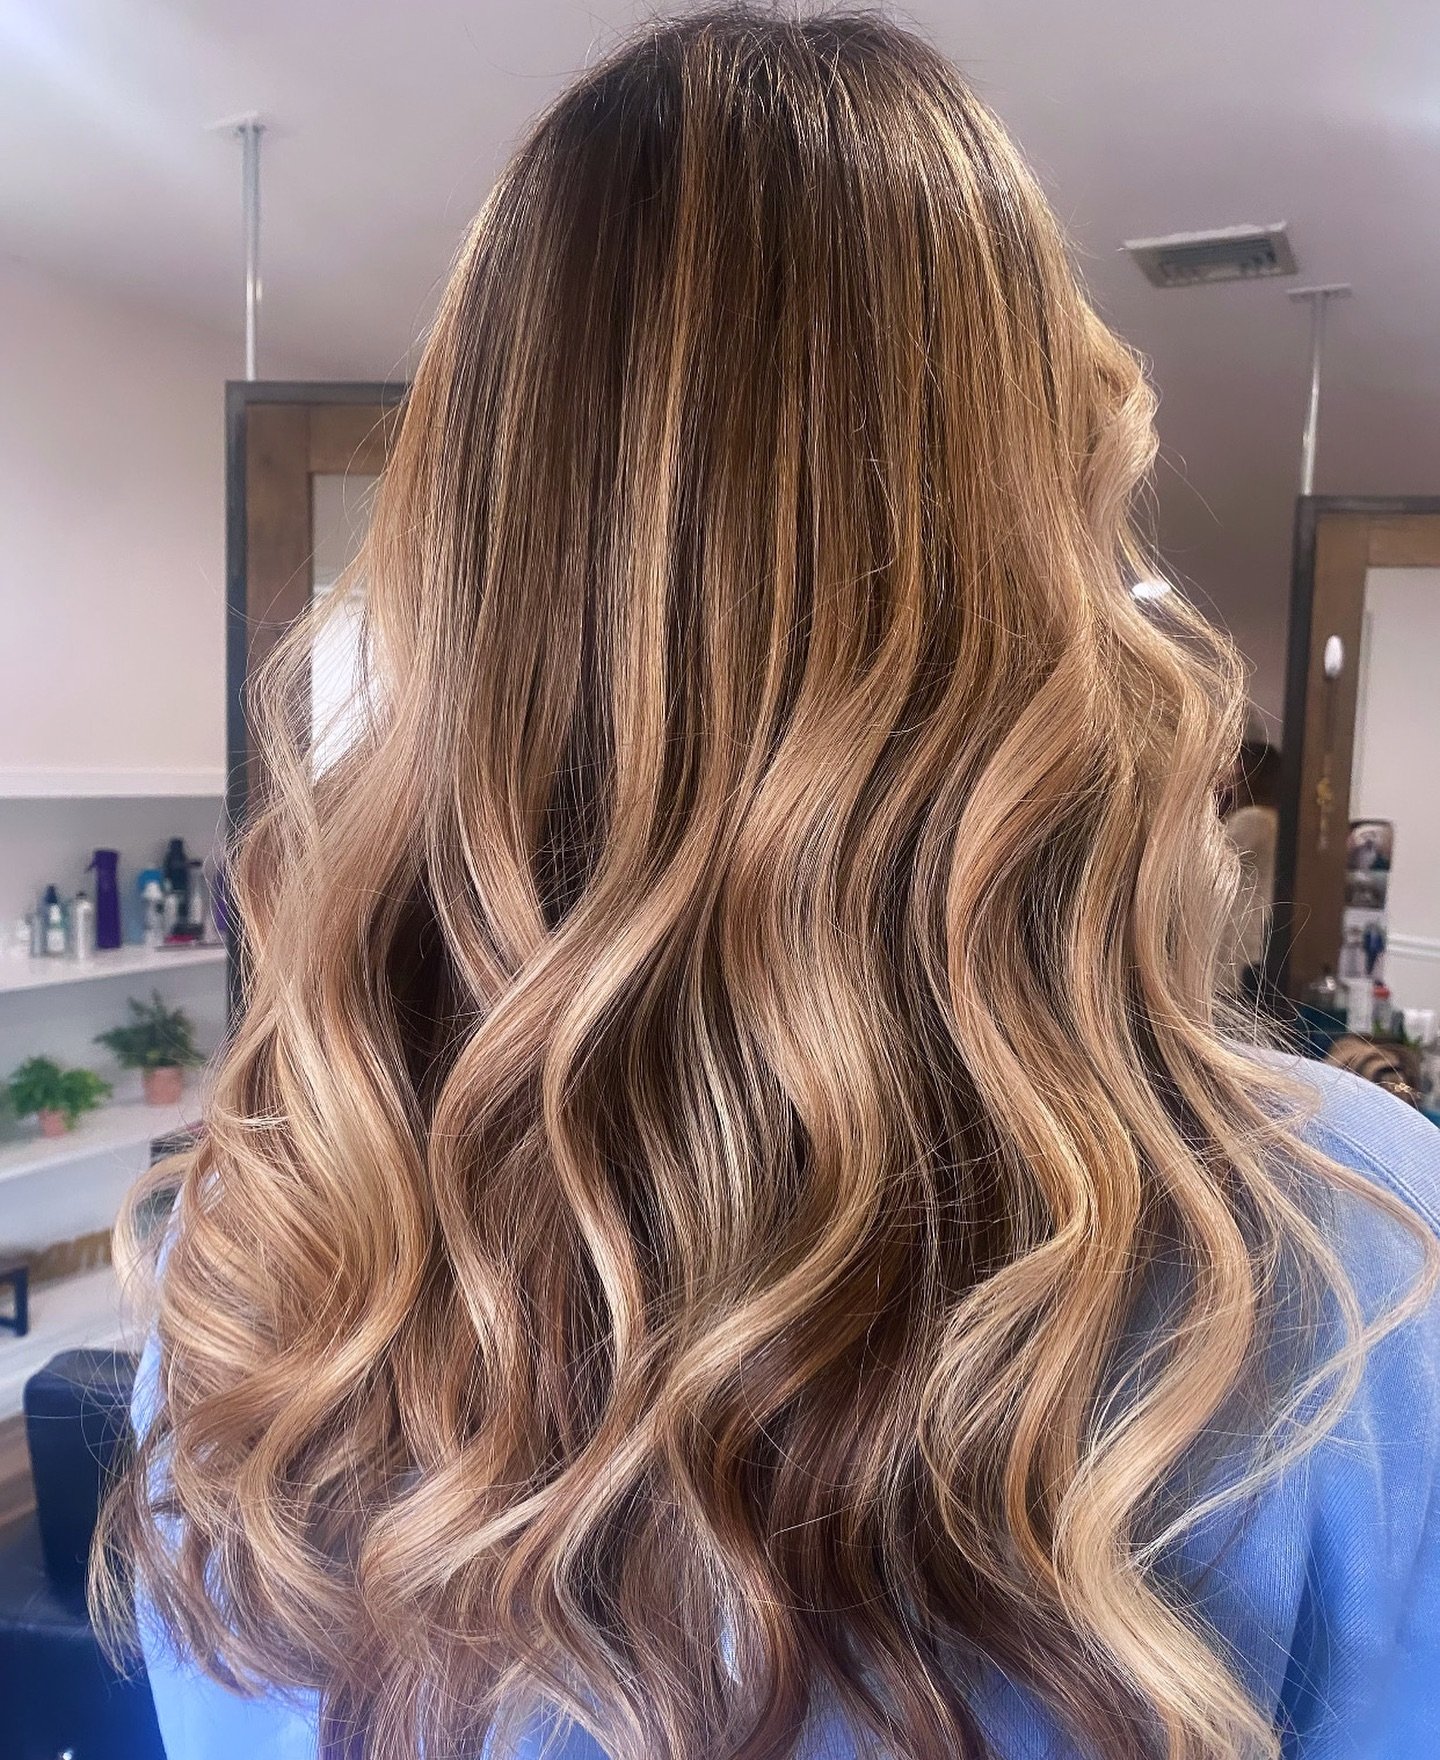 here for the dimension 👏✨ 
.
.
.
#hair #haircolor #balayage #blonde #beachblonde #blondebalayage #brownhair#brunettebalayage #balayagehighlights #babylights #dimension #dimensionalhair#highlights #babylights #balayagehair #hairpainting #hairgoals #h